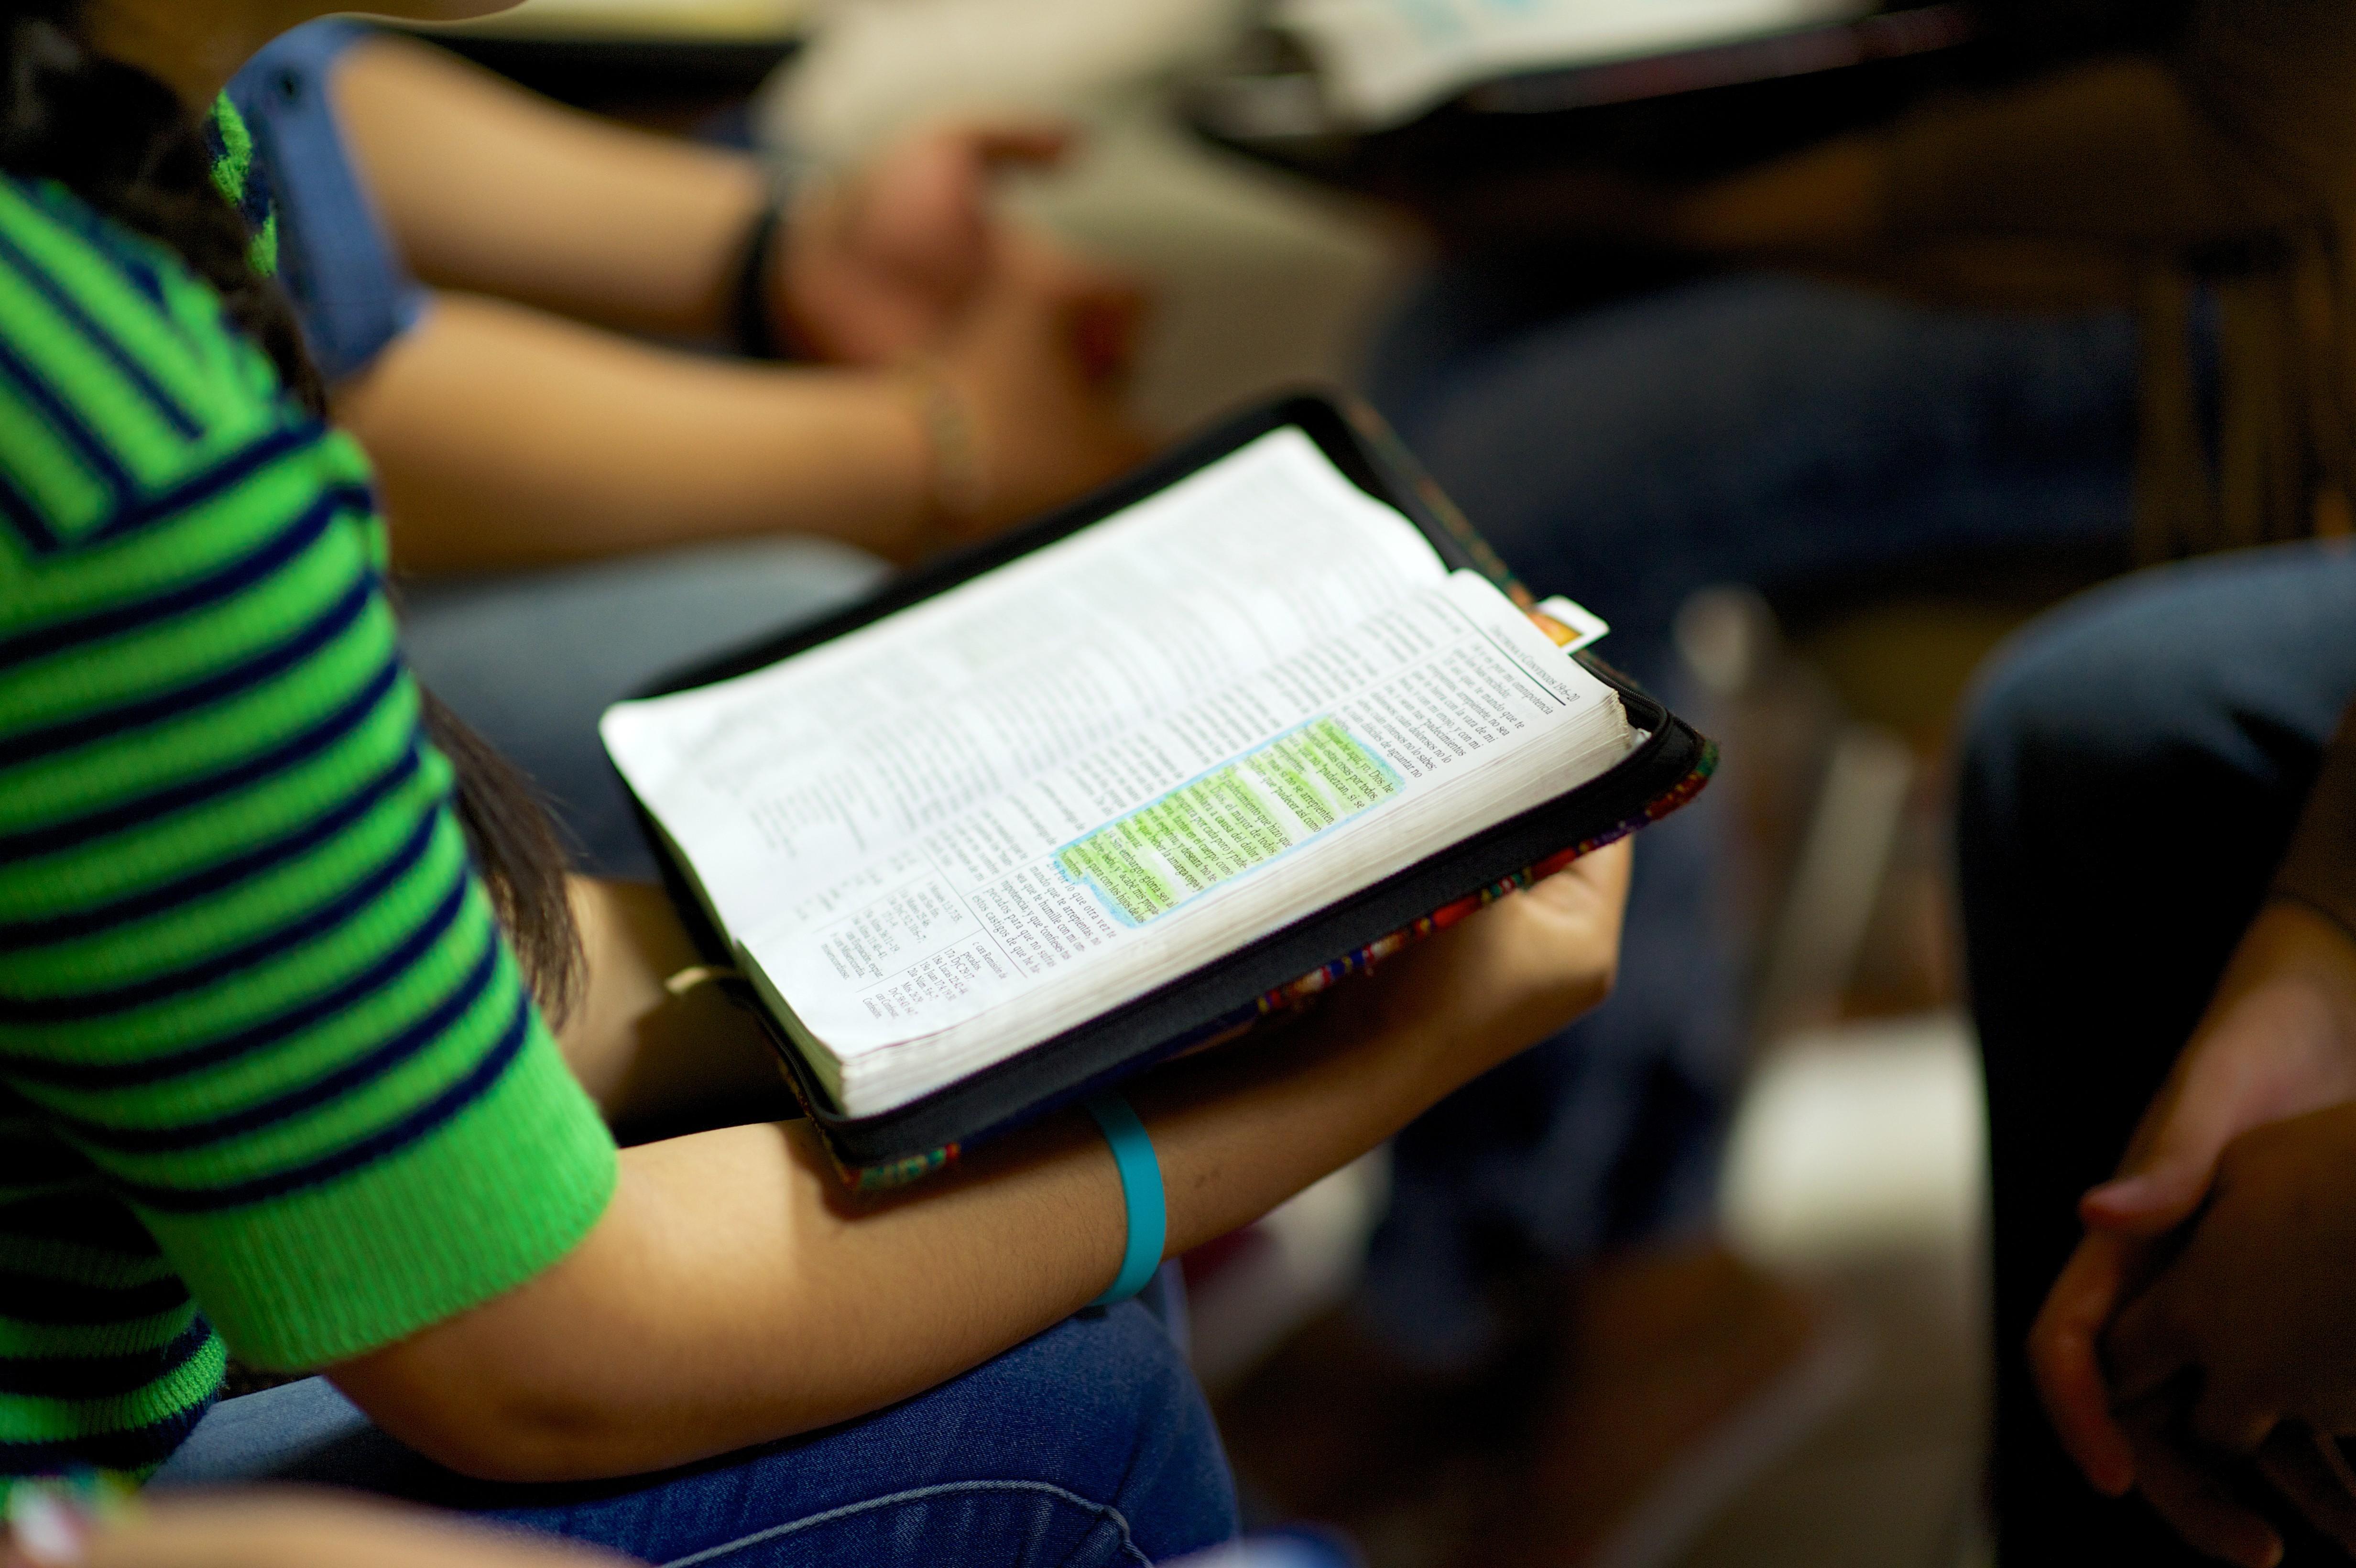 A girl in a green shirt holding open a book of scriptures in a zipper case during a group discussion.